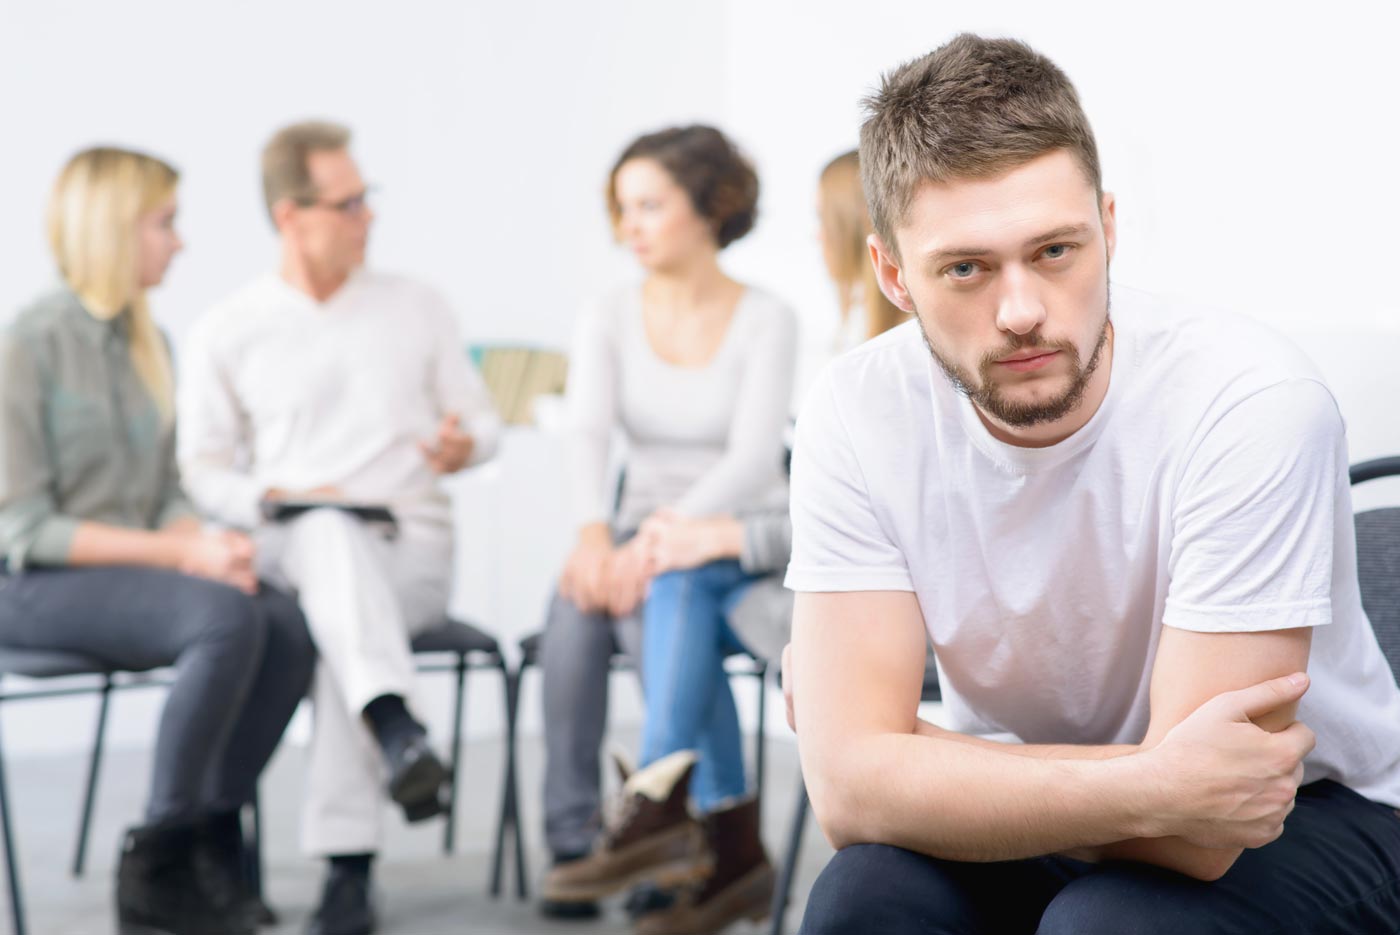 photo of man looking disinterested in talking with group